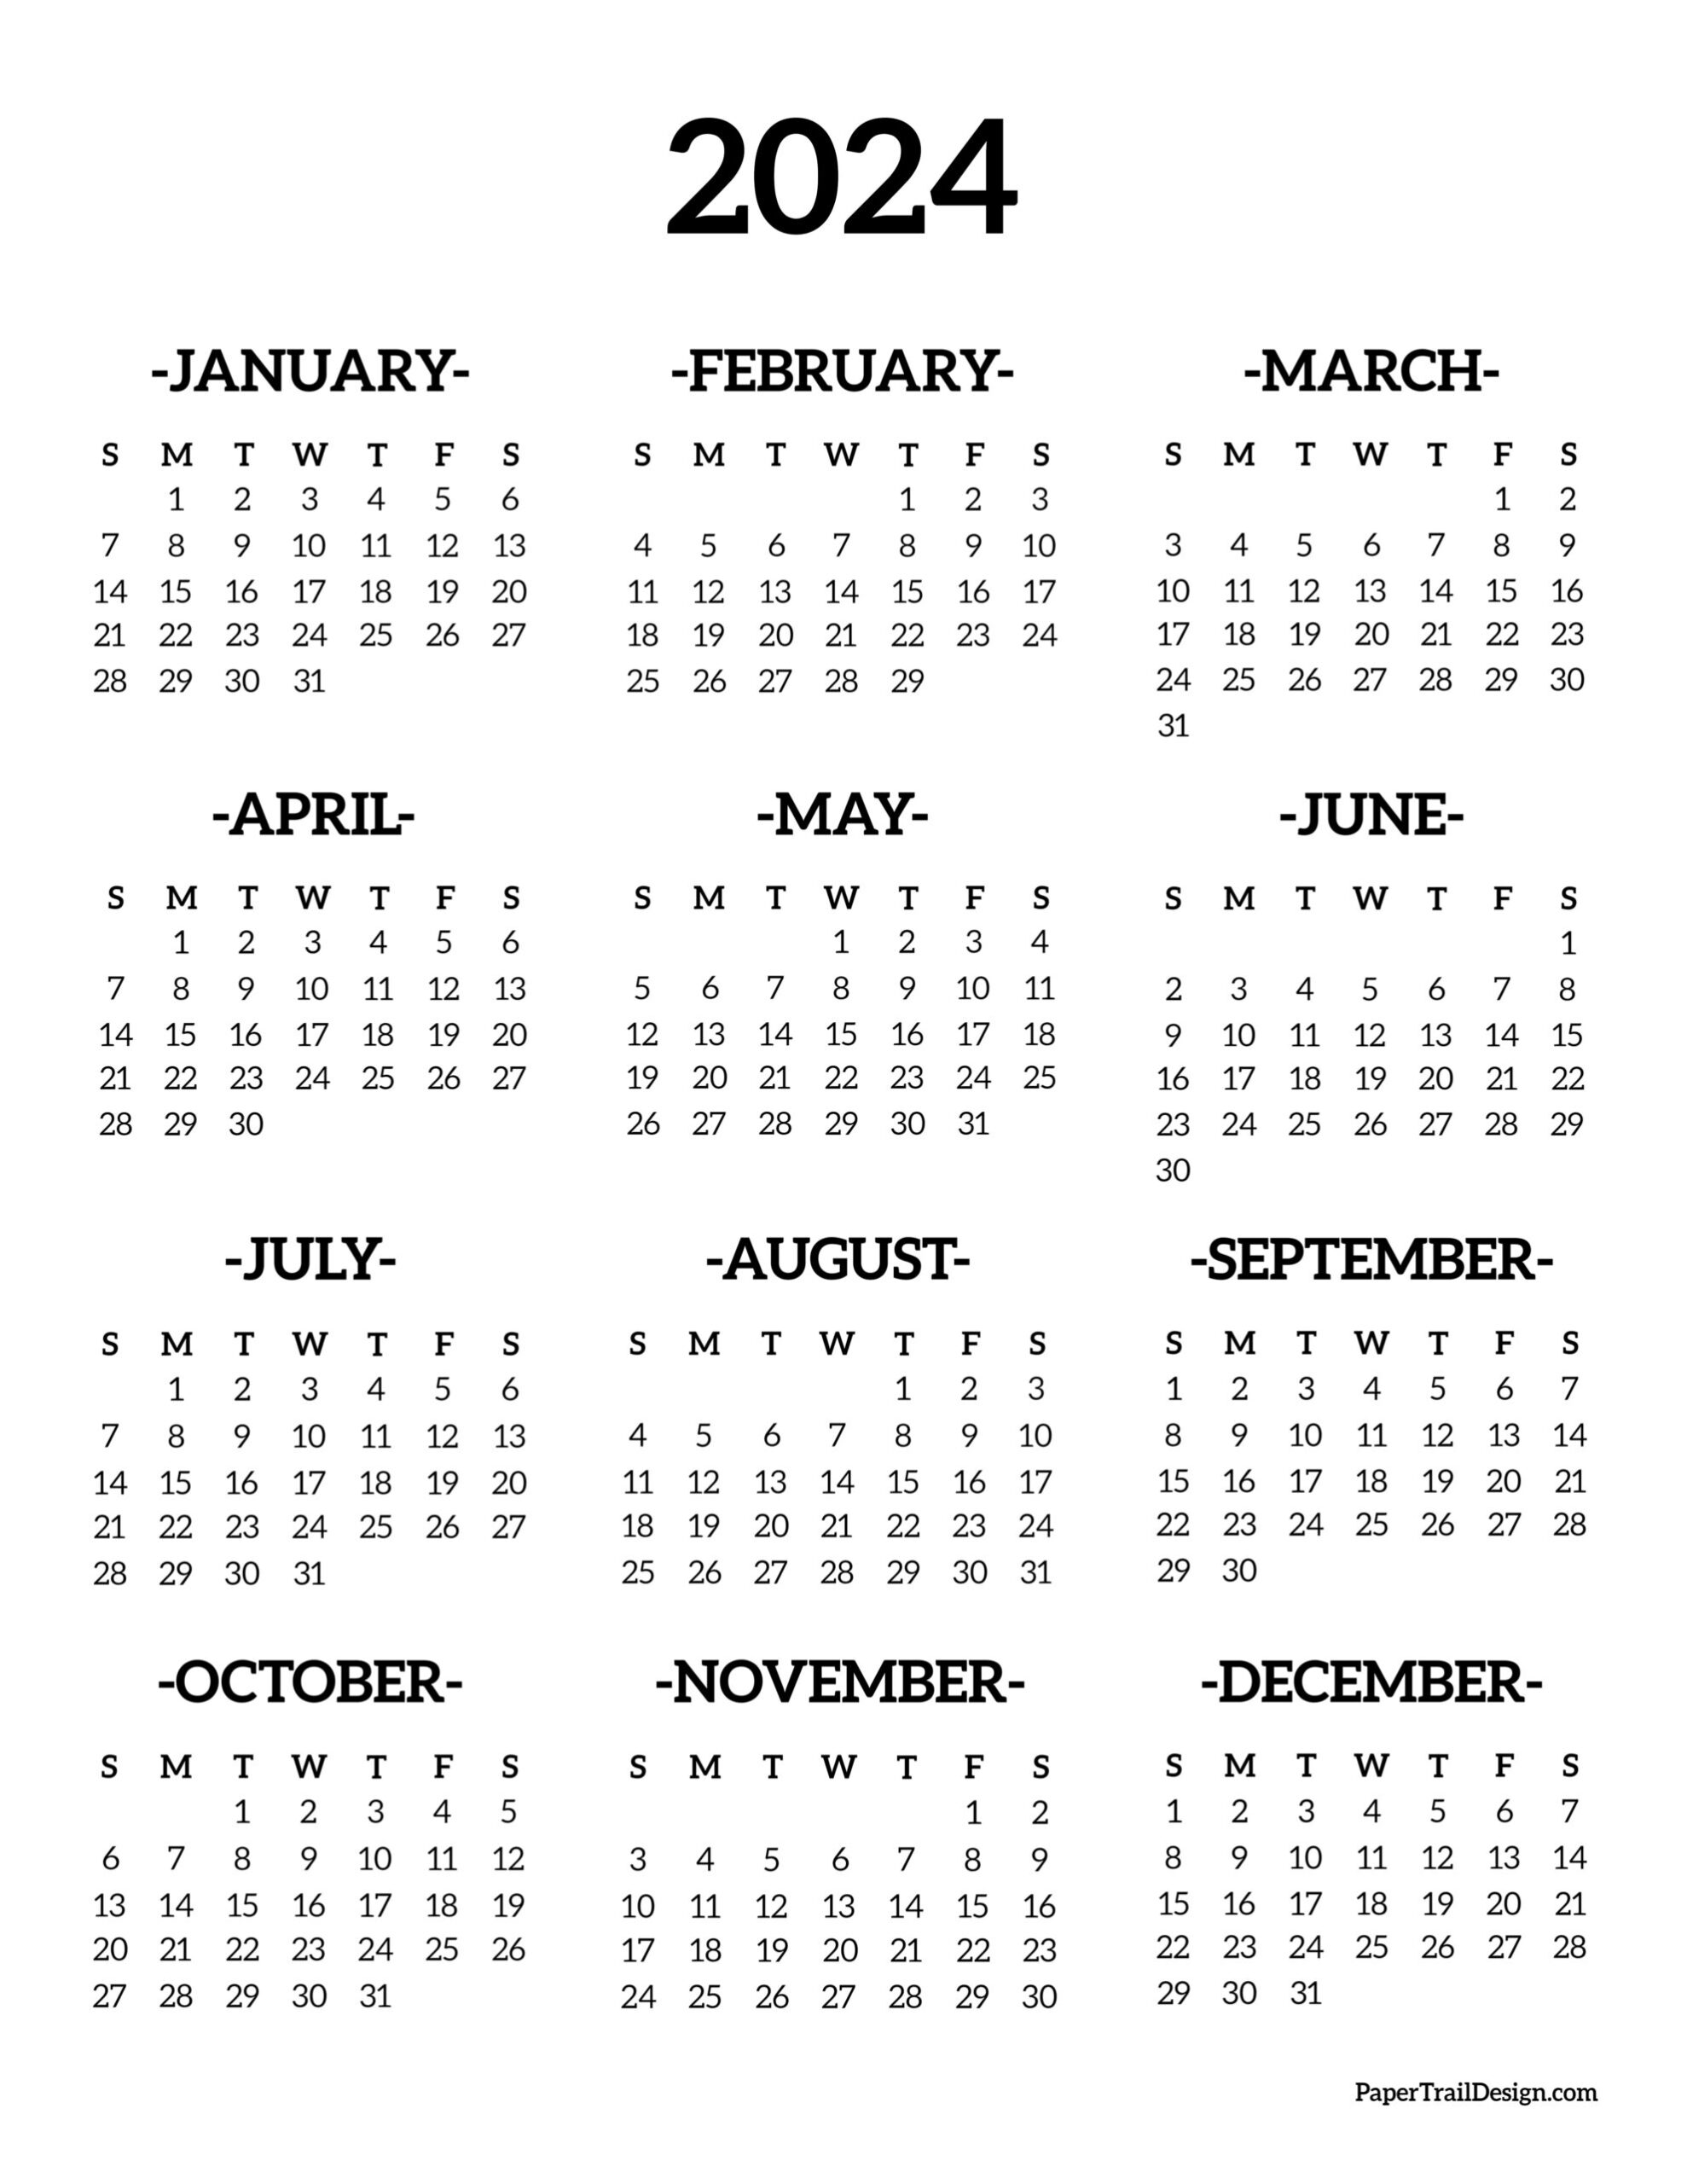 Calendar 2024 Printable One Page - Paper Trail Design for 2024 And 2024 Calendar Printable